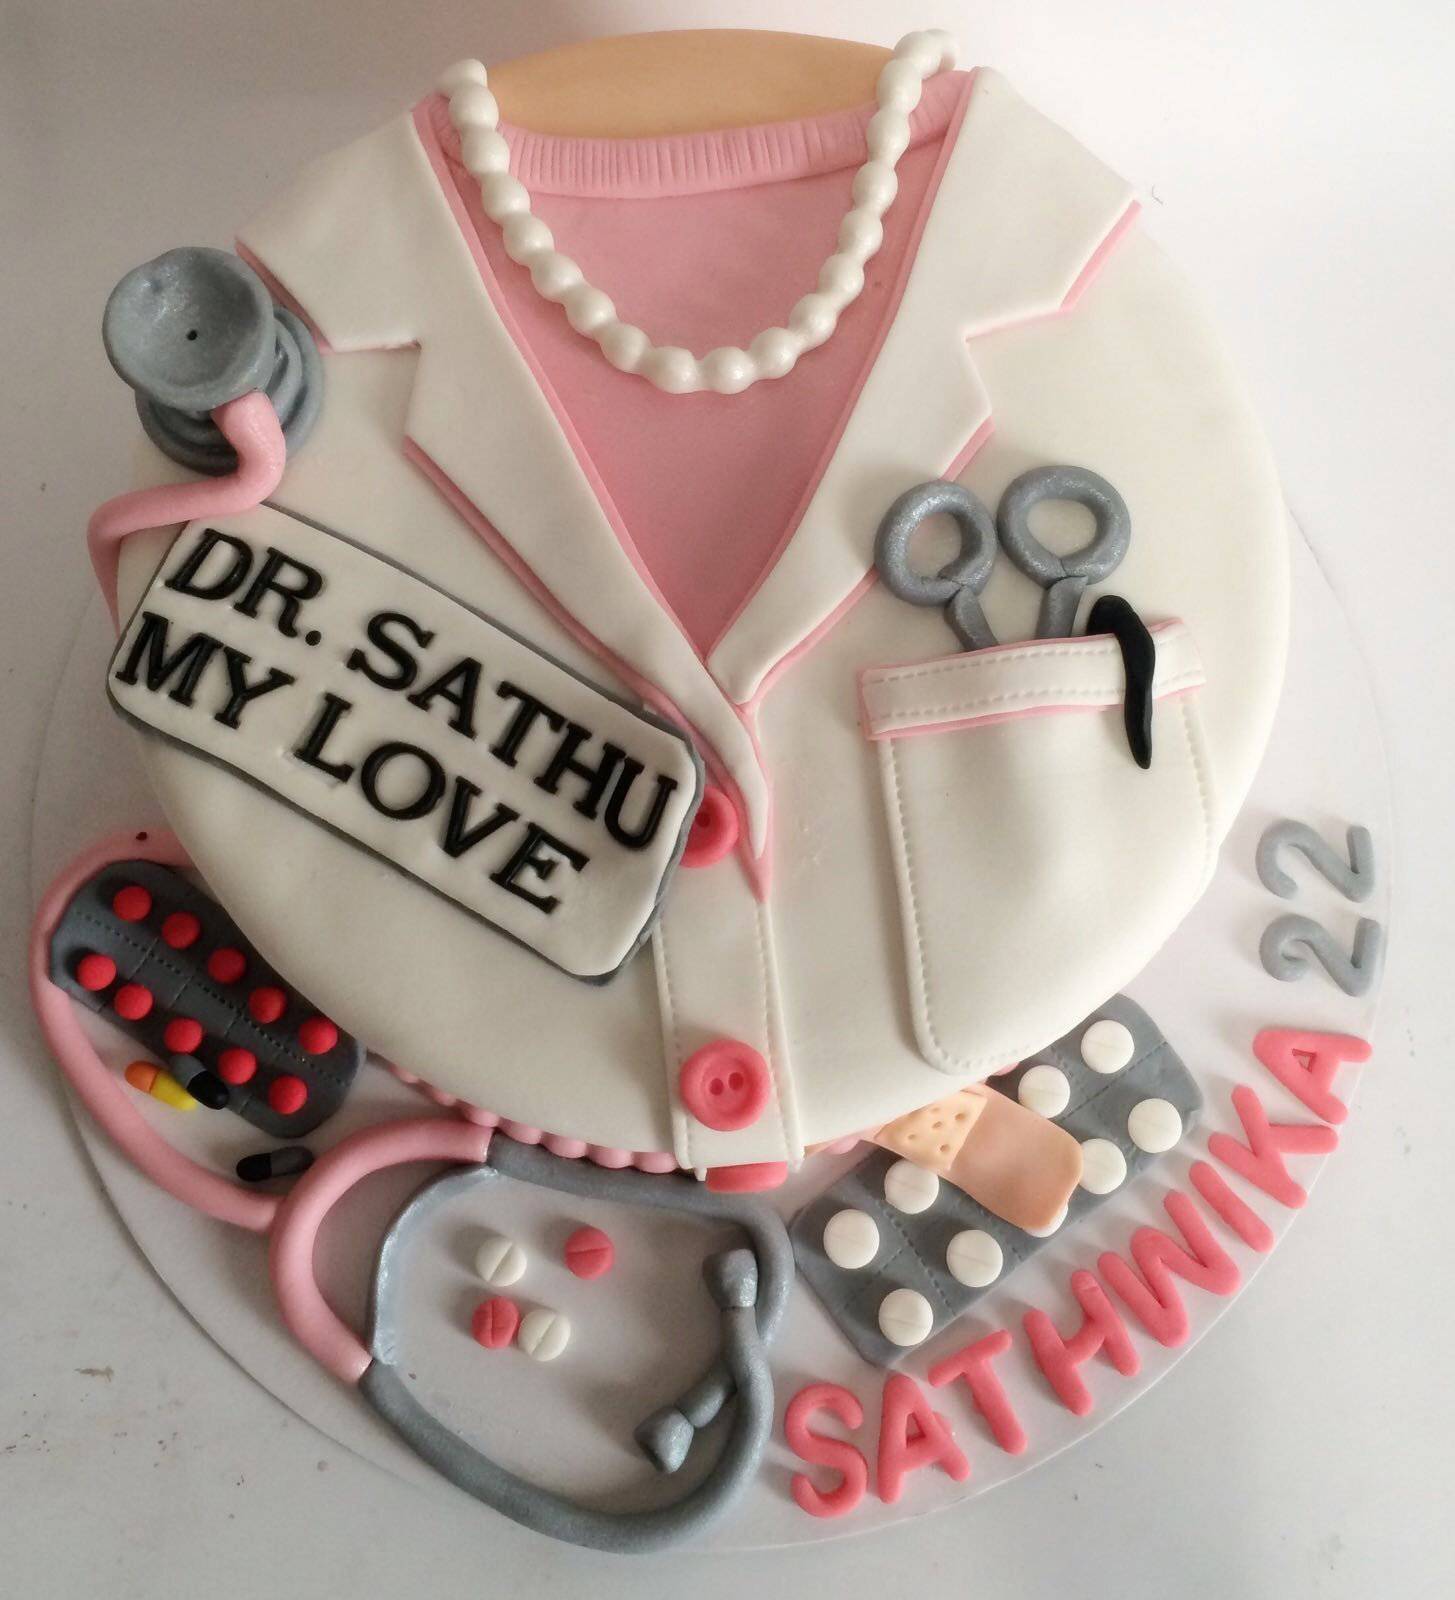 Buy Lady Doctor Customized Cake @ ₹2,399.00 For Delivery In East Delhi,  Noida, And Ghaziabad LallanTop Cake Shop